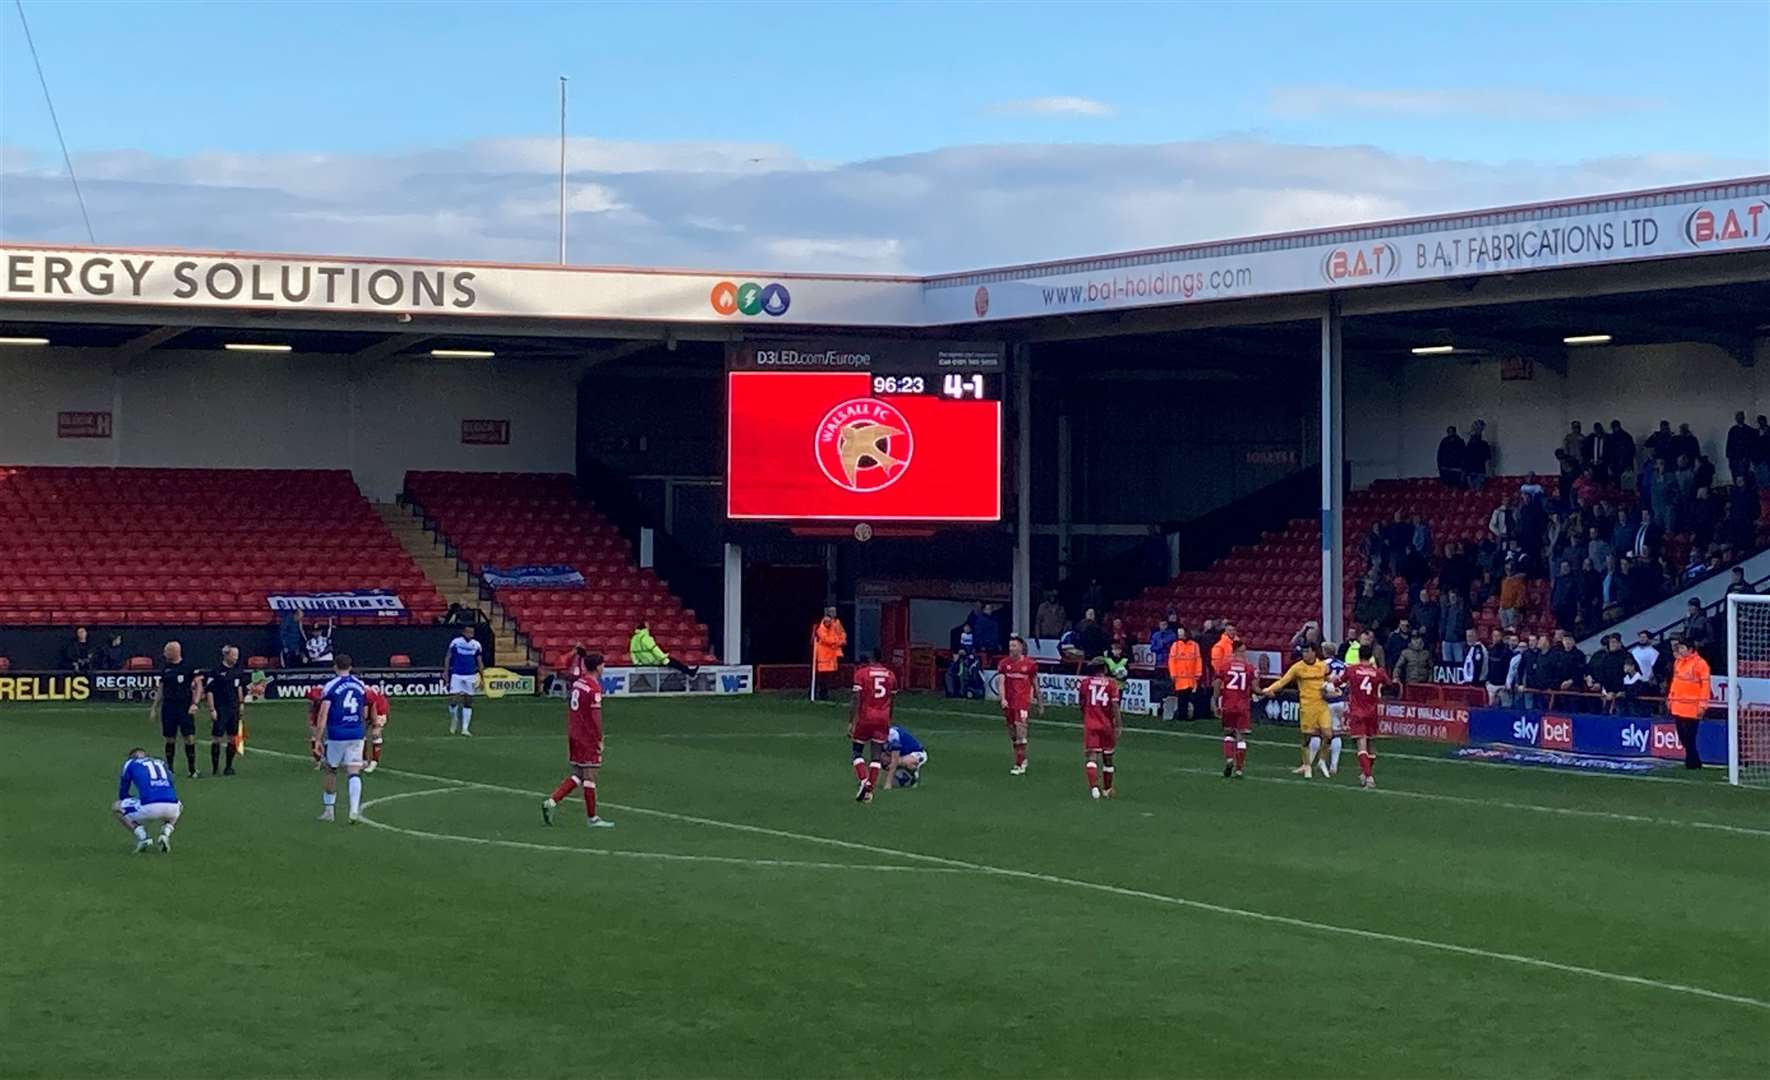 Final whistle as Gillingham are beaten 4-1 at Walsall in the league